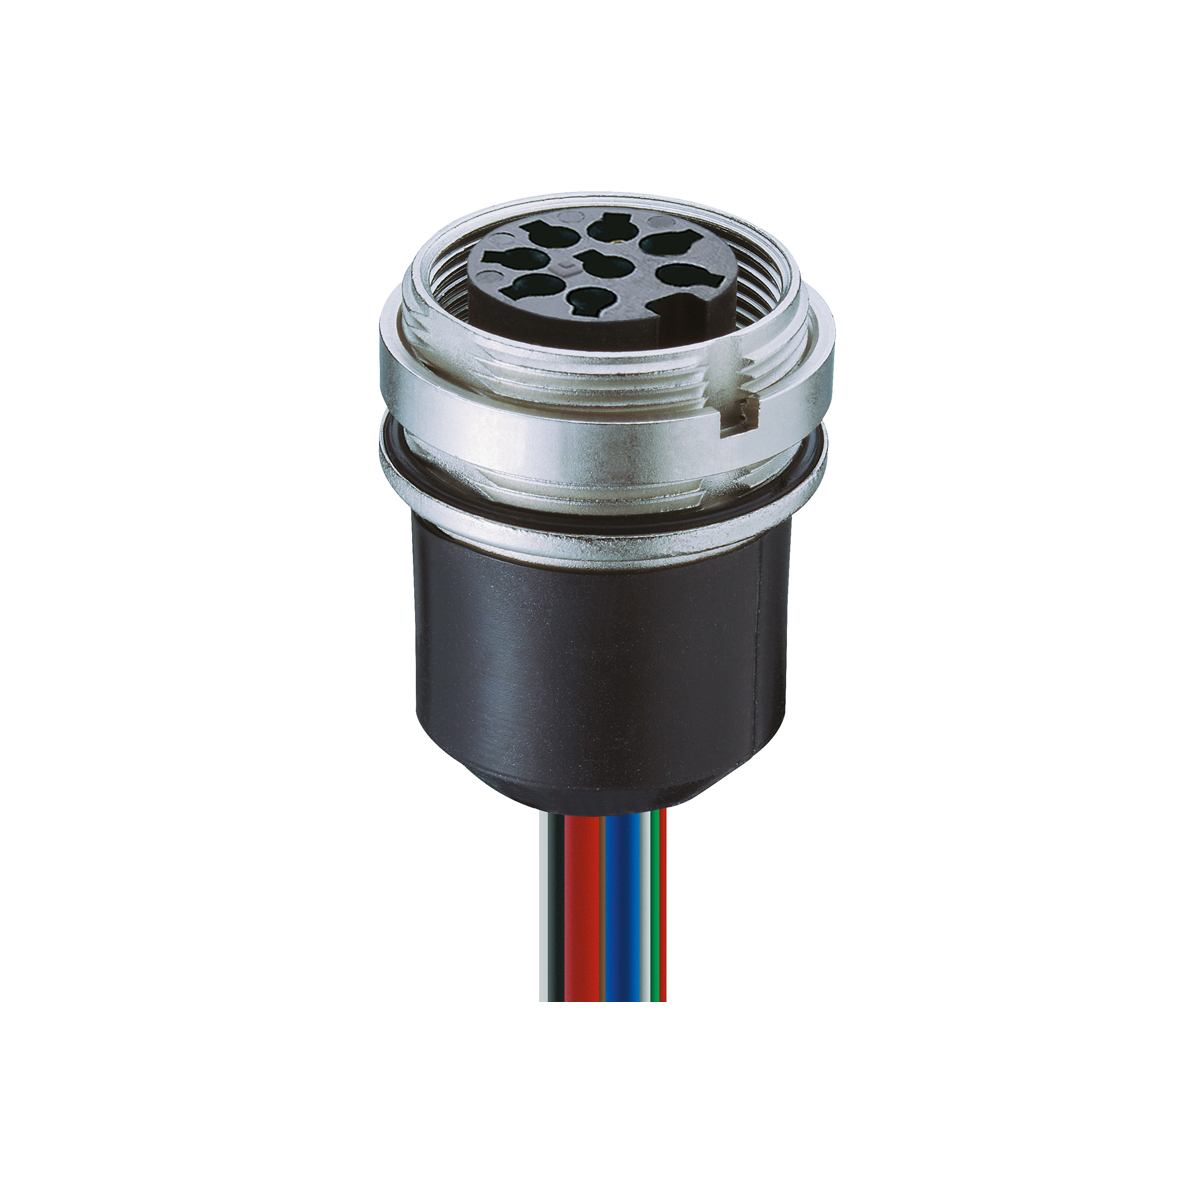 Lumberg: 0305-1 U (Series 03 | Circular connectors with threaded joint M16 acc. to IEC 61076-2-106, IP40/IP68)